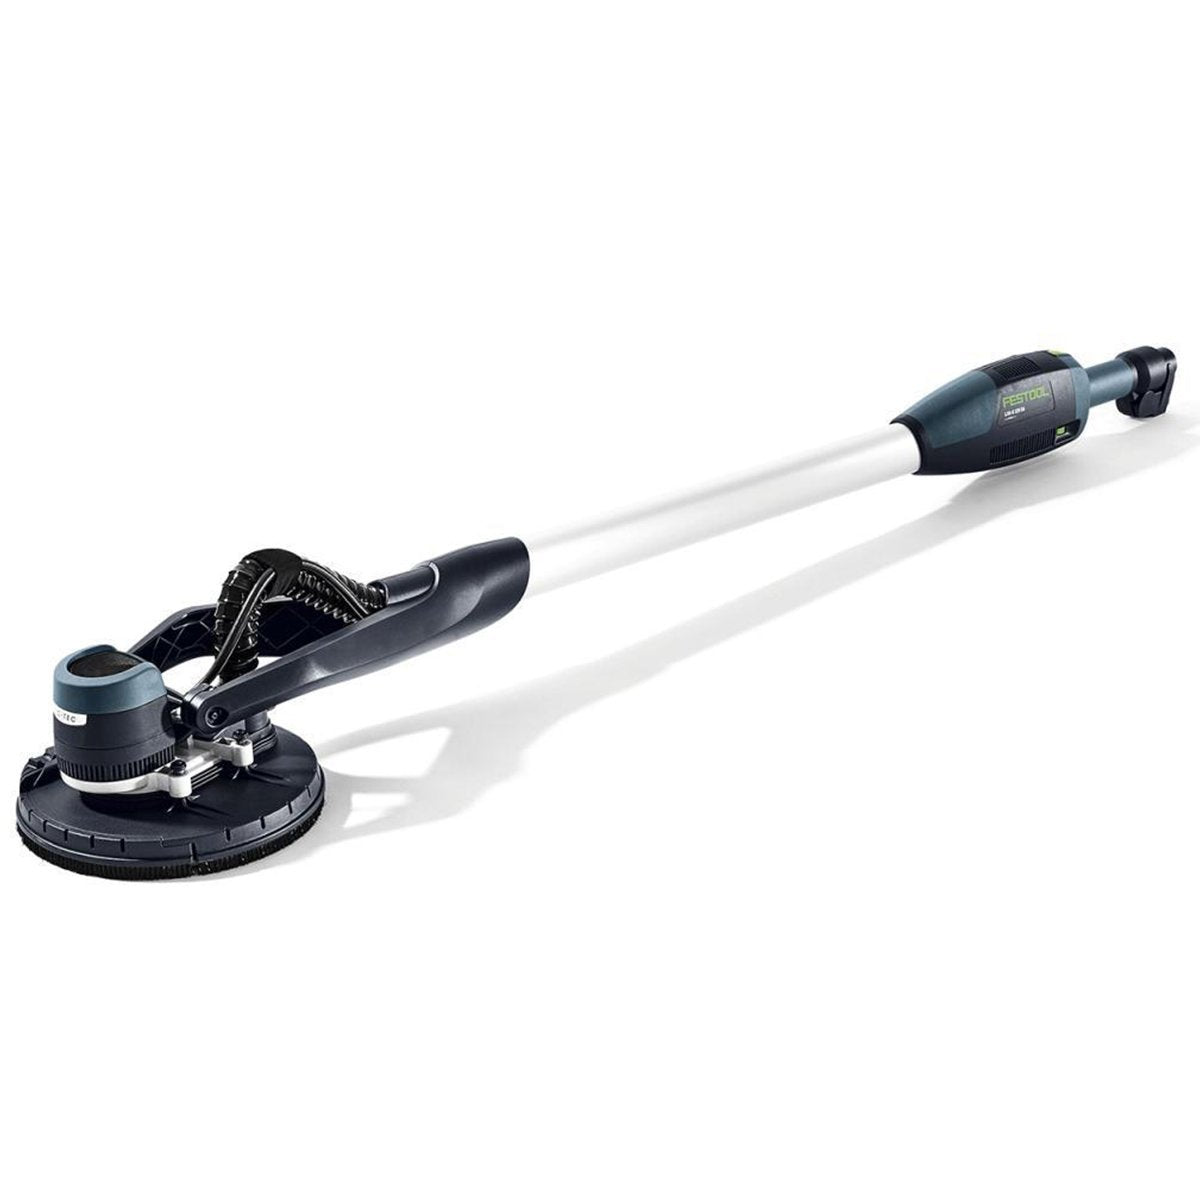 The long reach Planex Easy allows sanding of walls and ceilings without scaffolding or stilts.